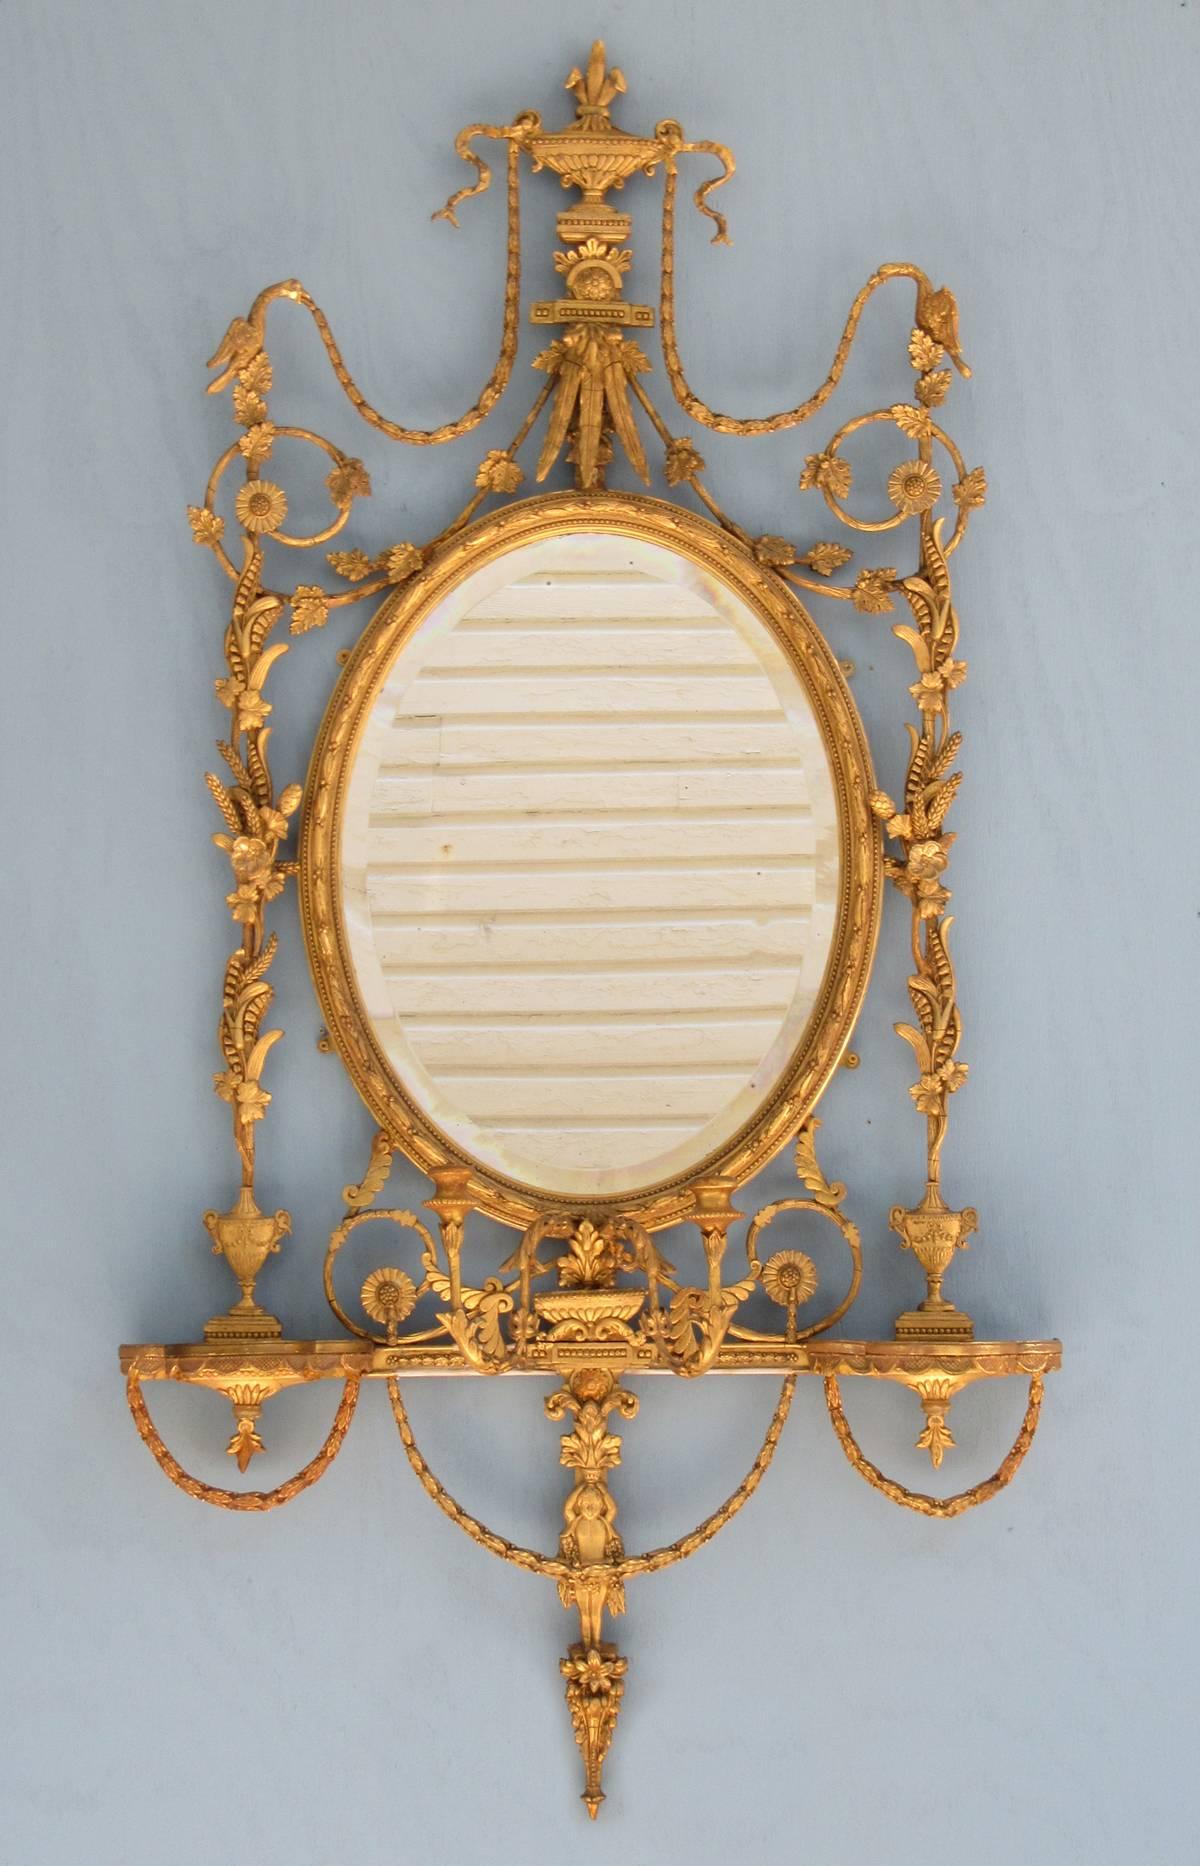 A stunning pair of 19th century English Adams giltwood mirrors, circa 1800, each featuring original beveled mirror plate, two girandole candle arms and two shelf brackets. The giltwood motifs on each mirror feature Ho Ho birds, sheaths of wheat,